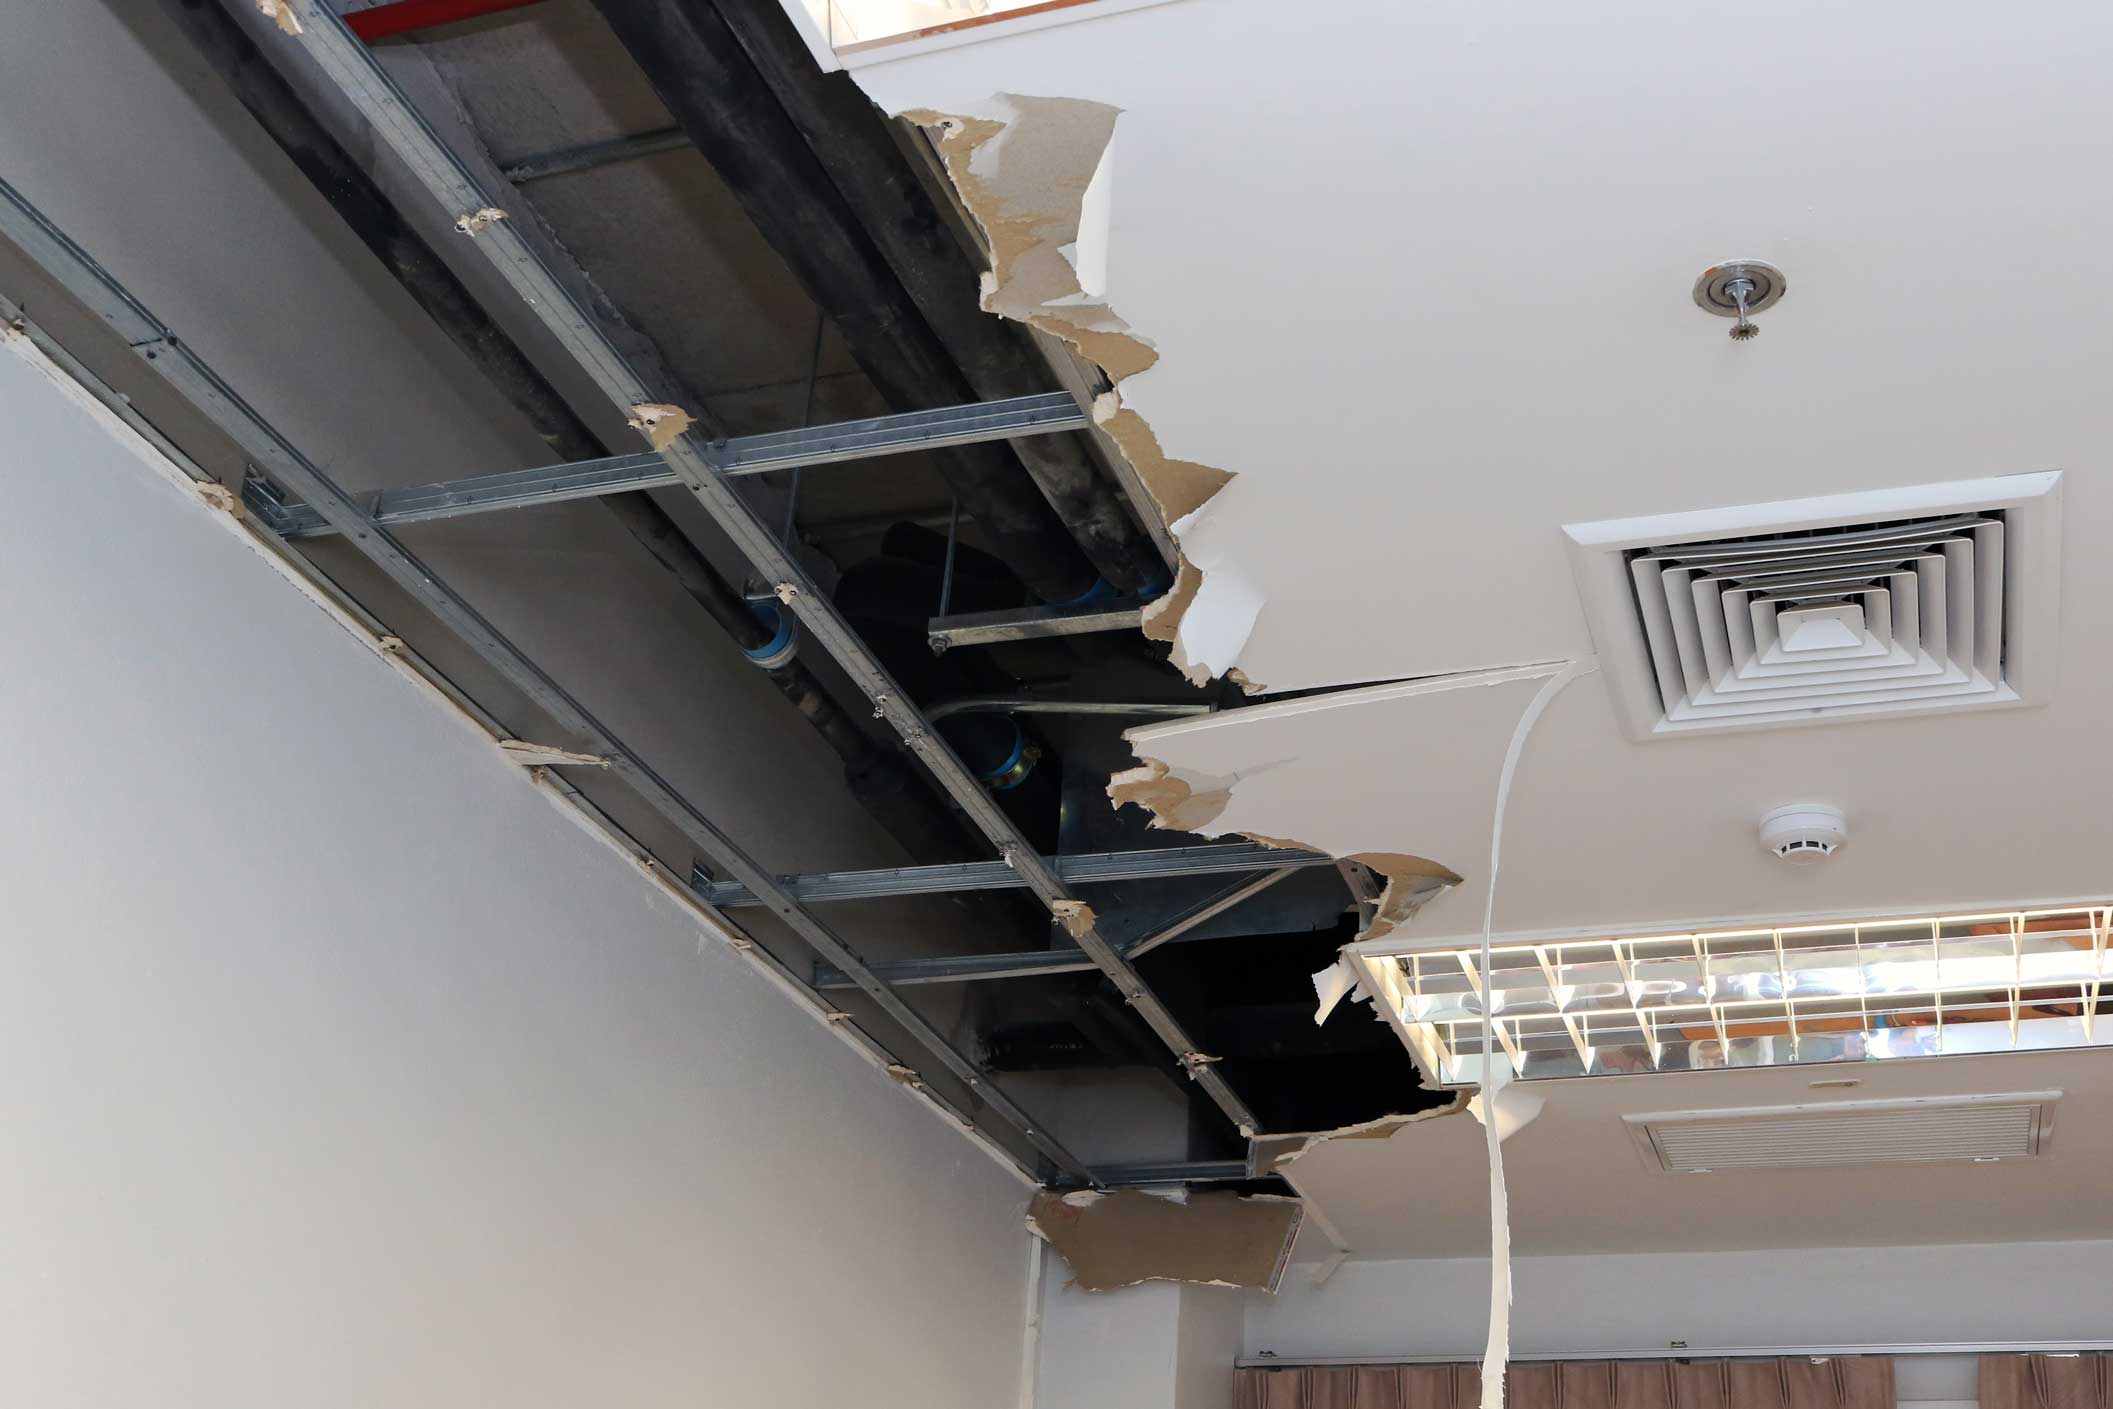 The leading causes of water damage in ceilings - WINT Blog